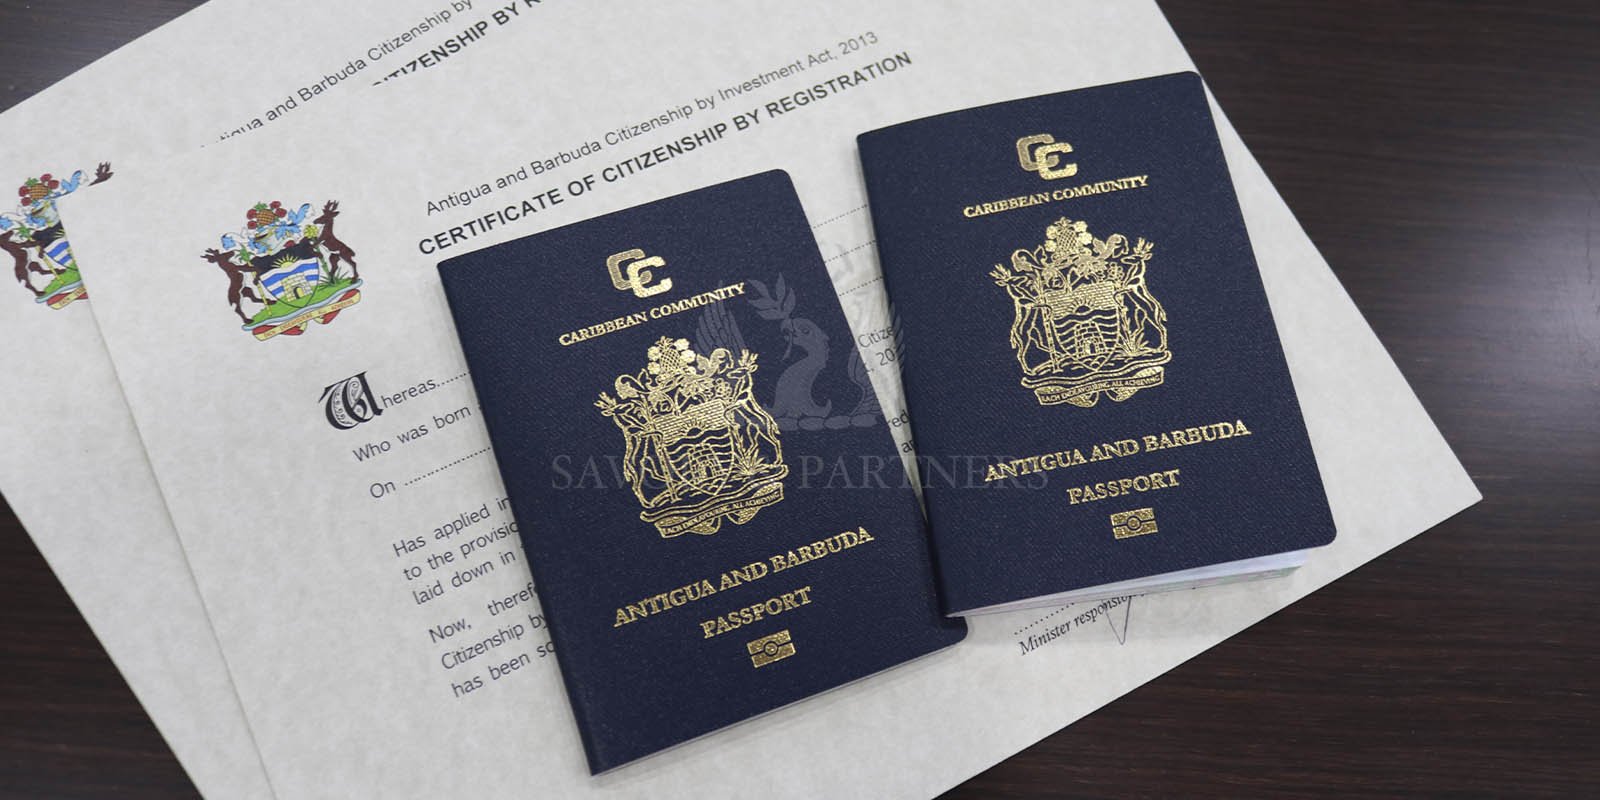 The Government of Antigua & Barbuda is the first Caribbean country to start processing Citizenship applications from stateless applicants